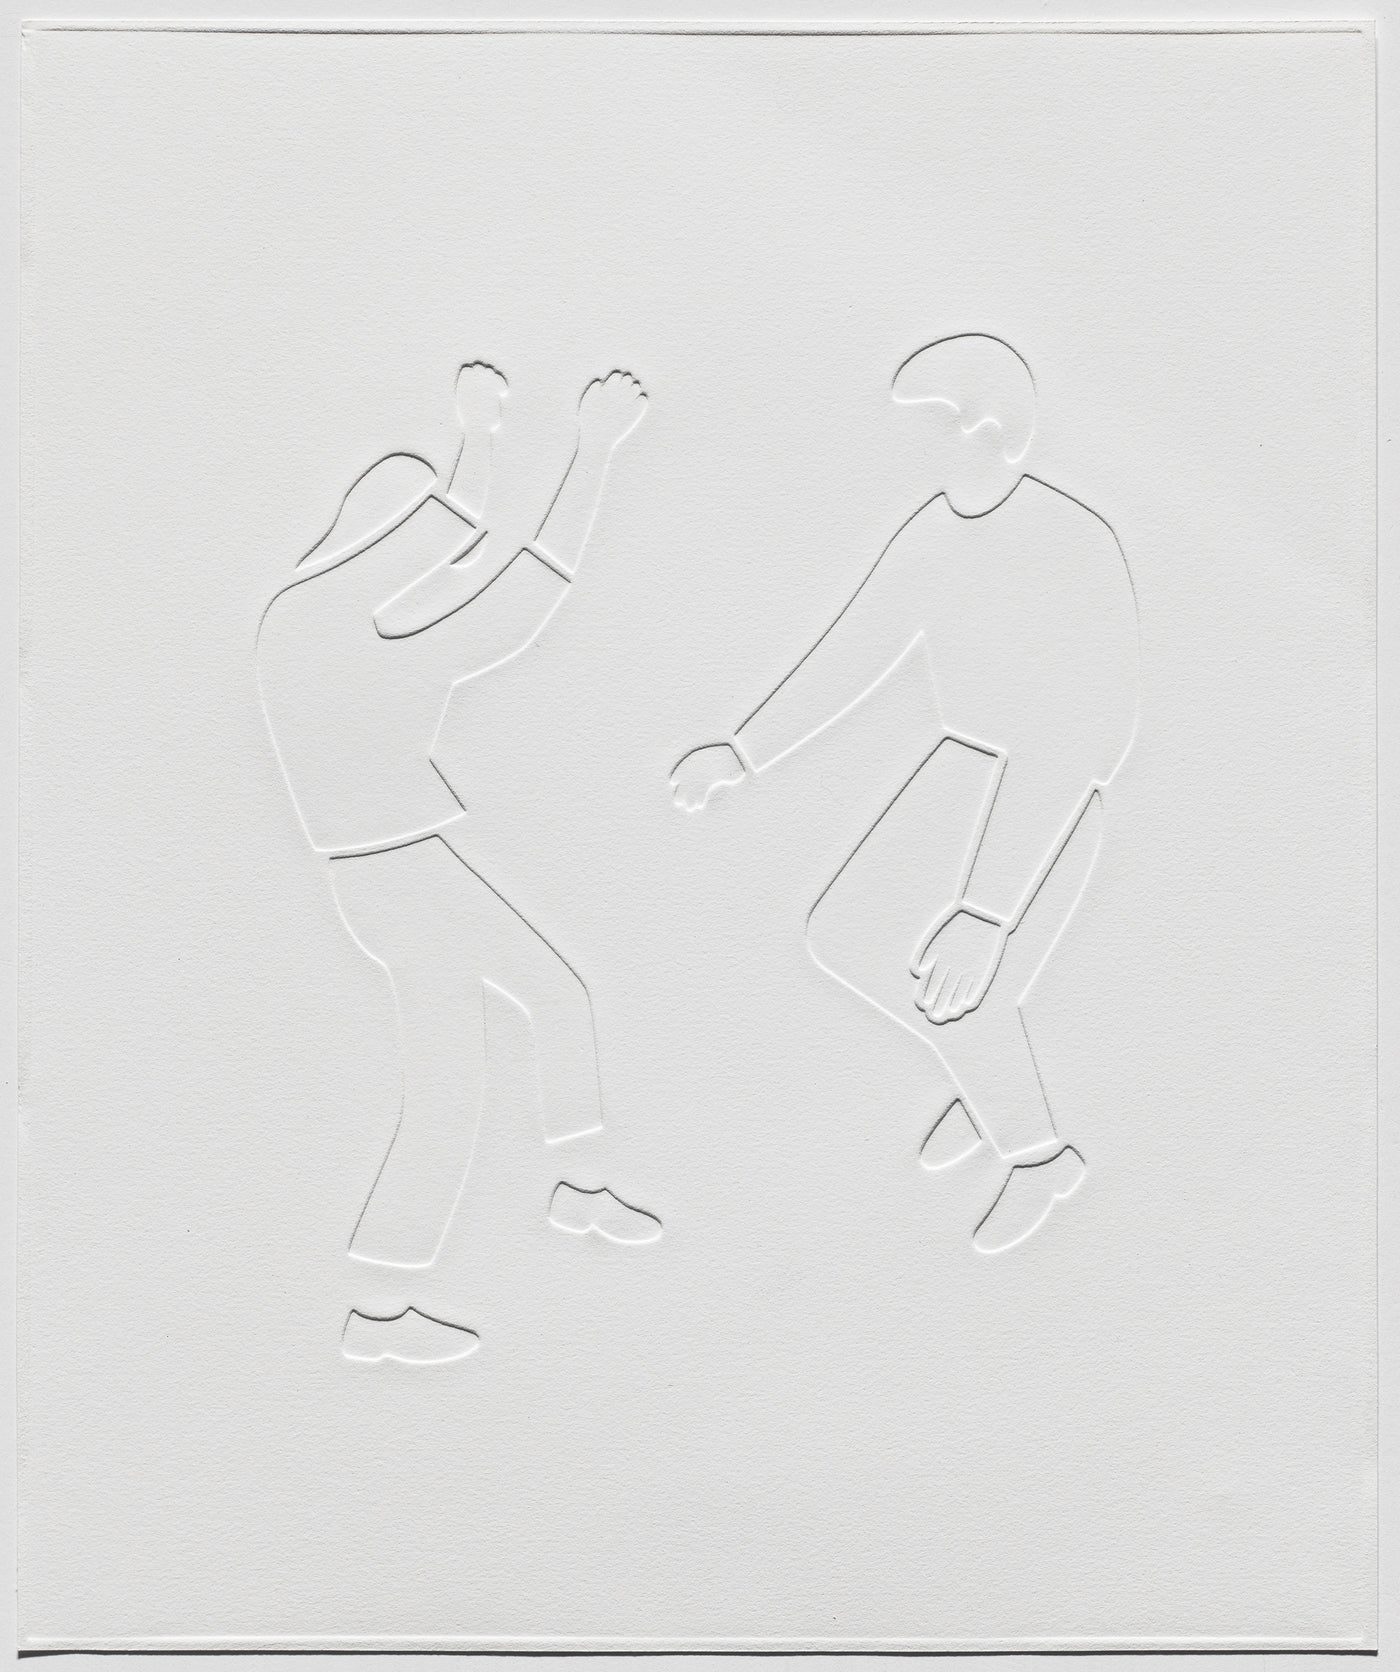 "Dance With Arms Up", 17 1/4 x 14 1/4” debossed relief print on BFK Rives white 280gsm, 2022